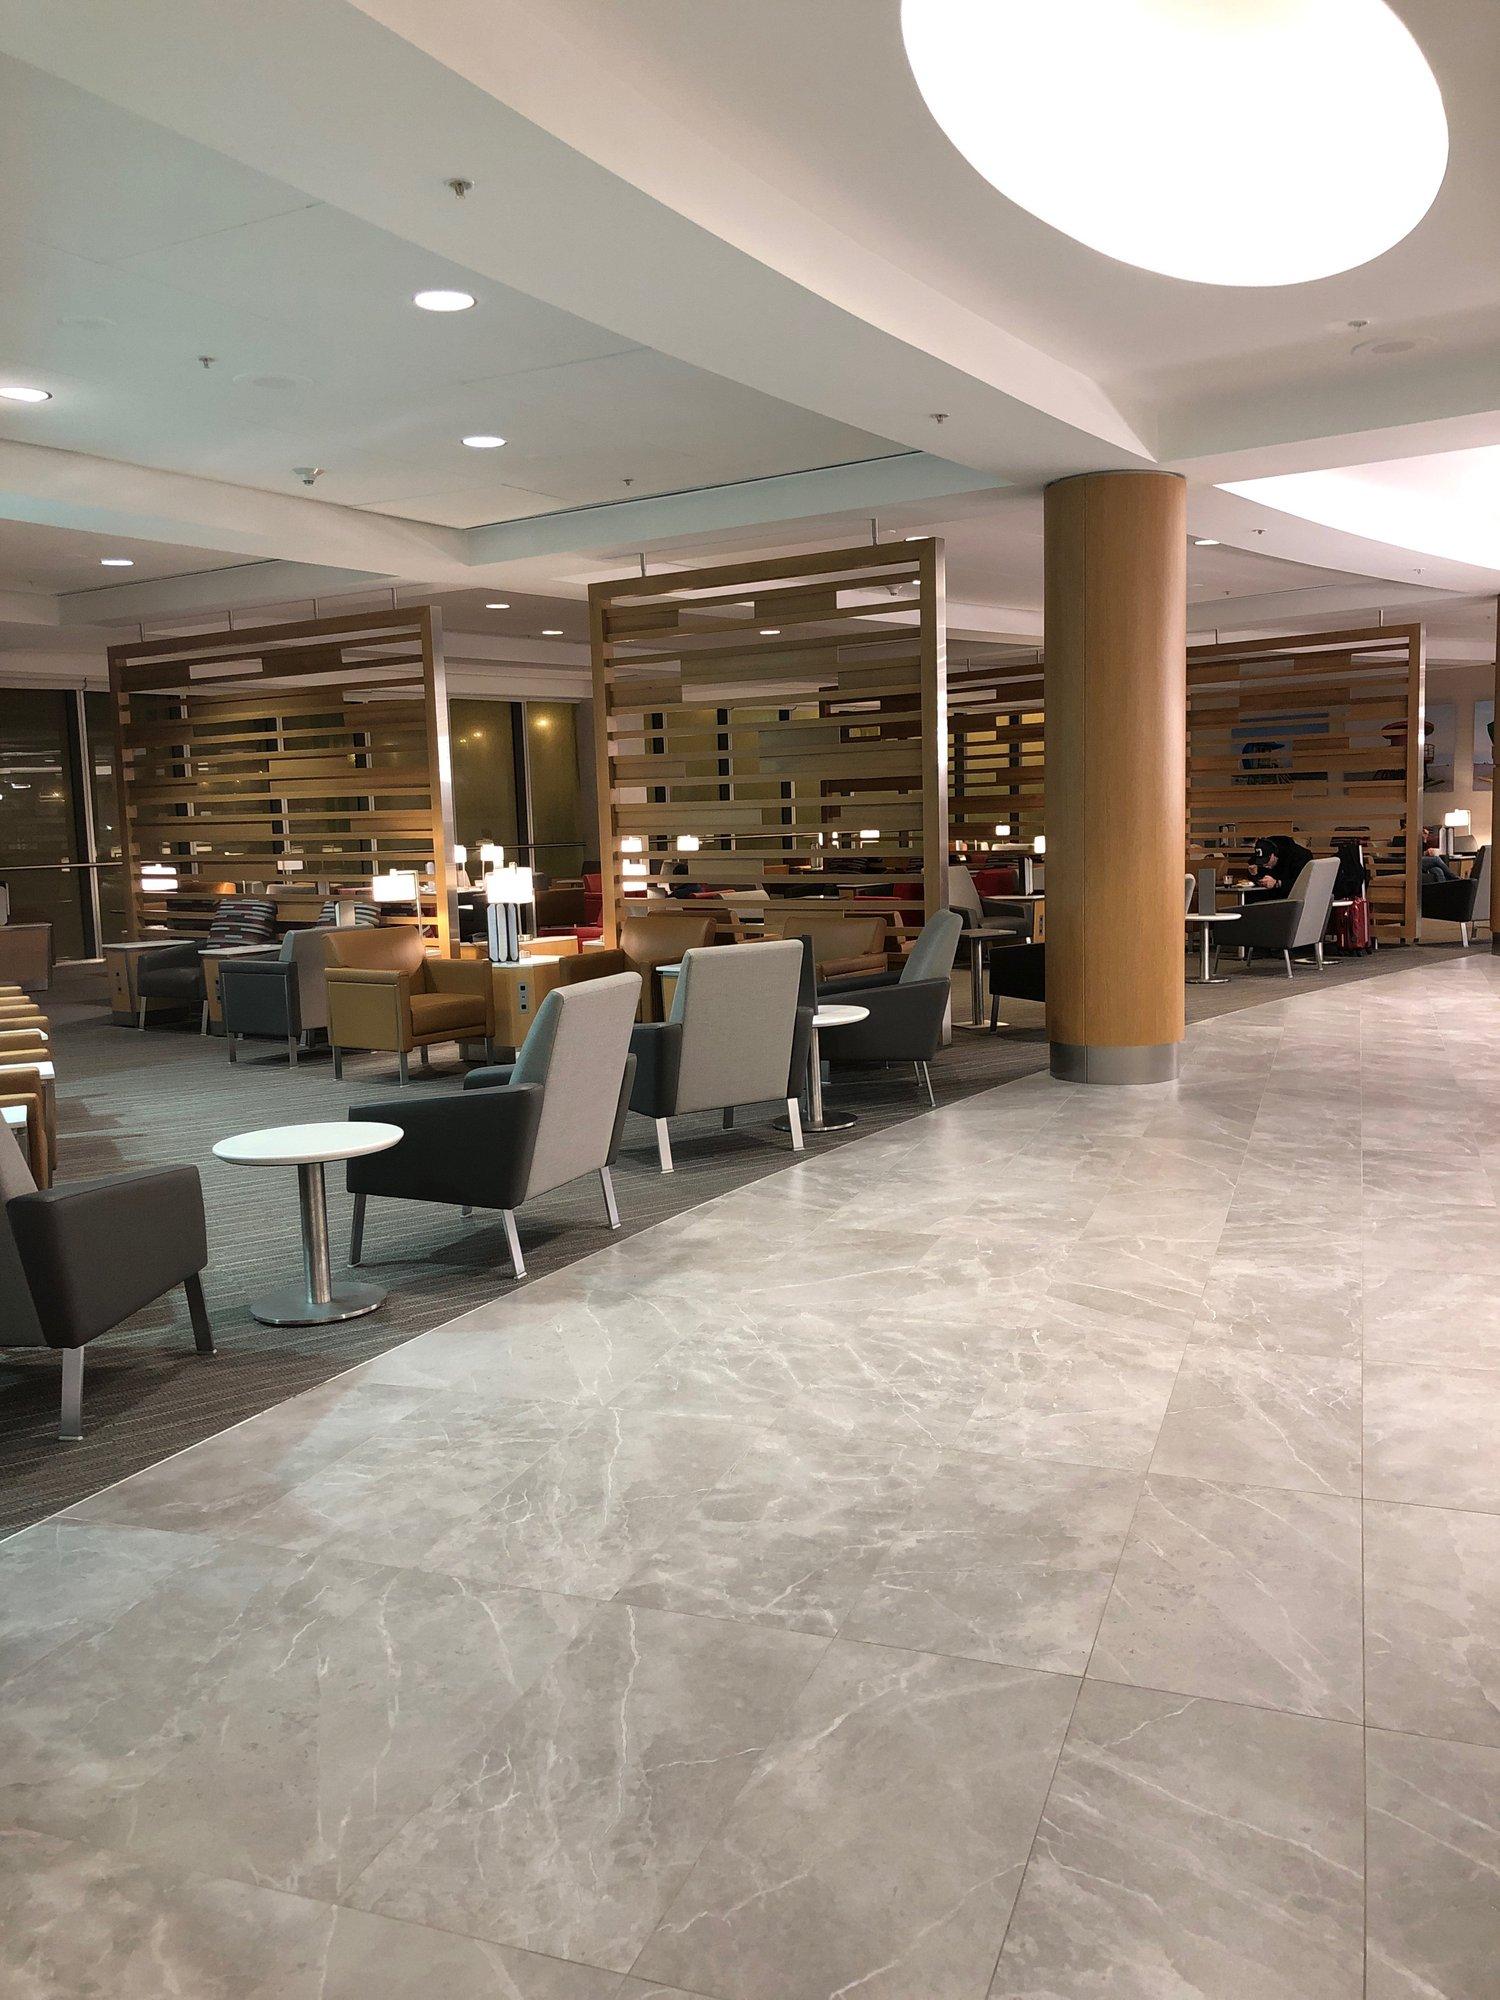 American Airlines Admirals Club (Gate D30) image 3 of 7